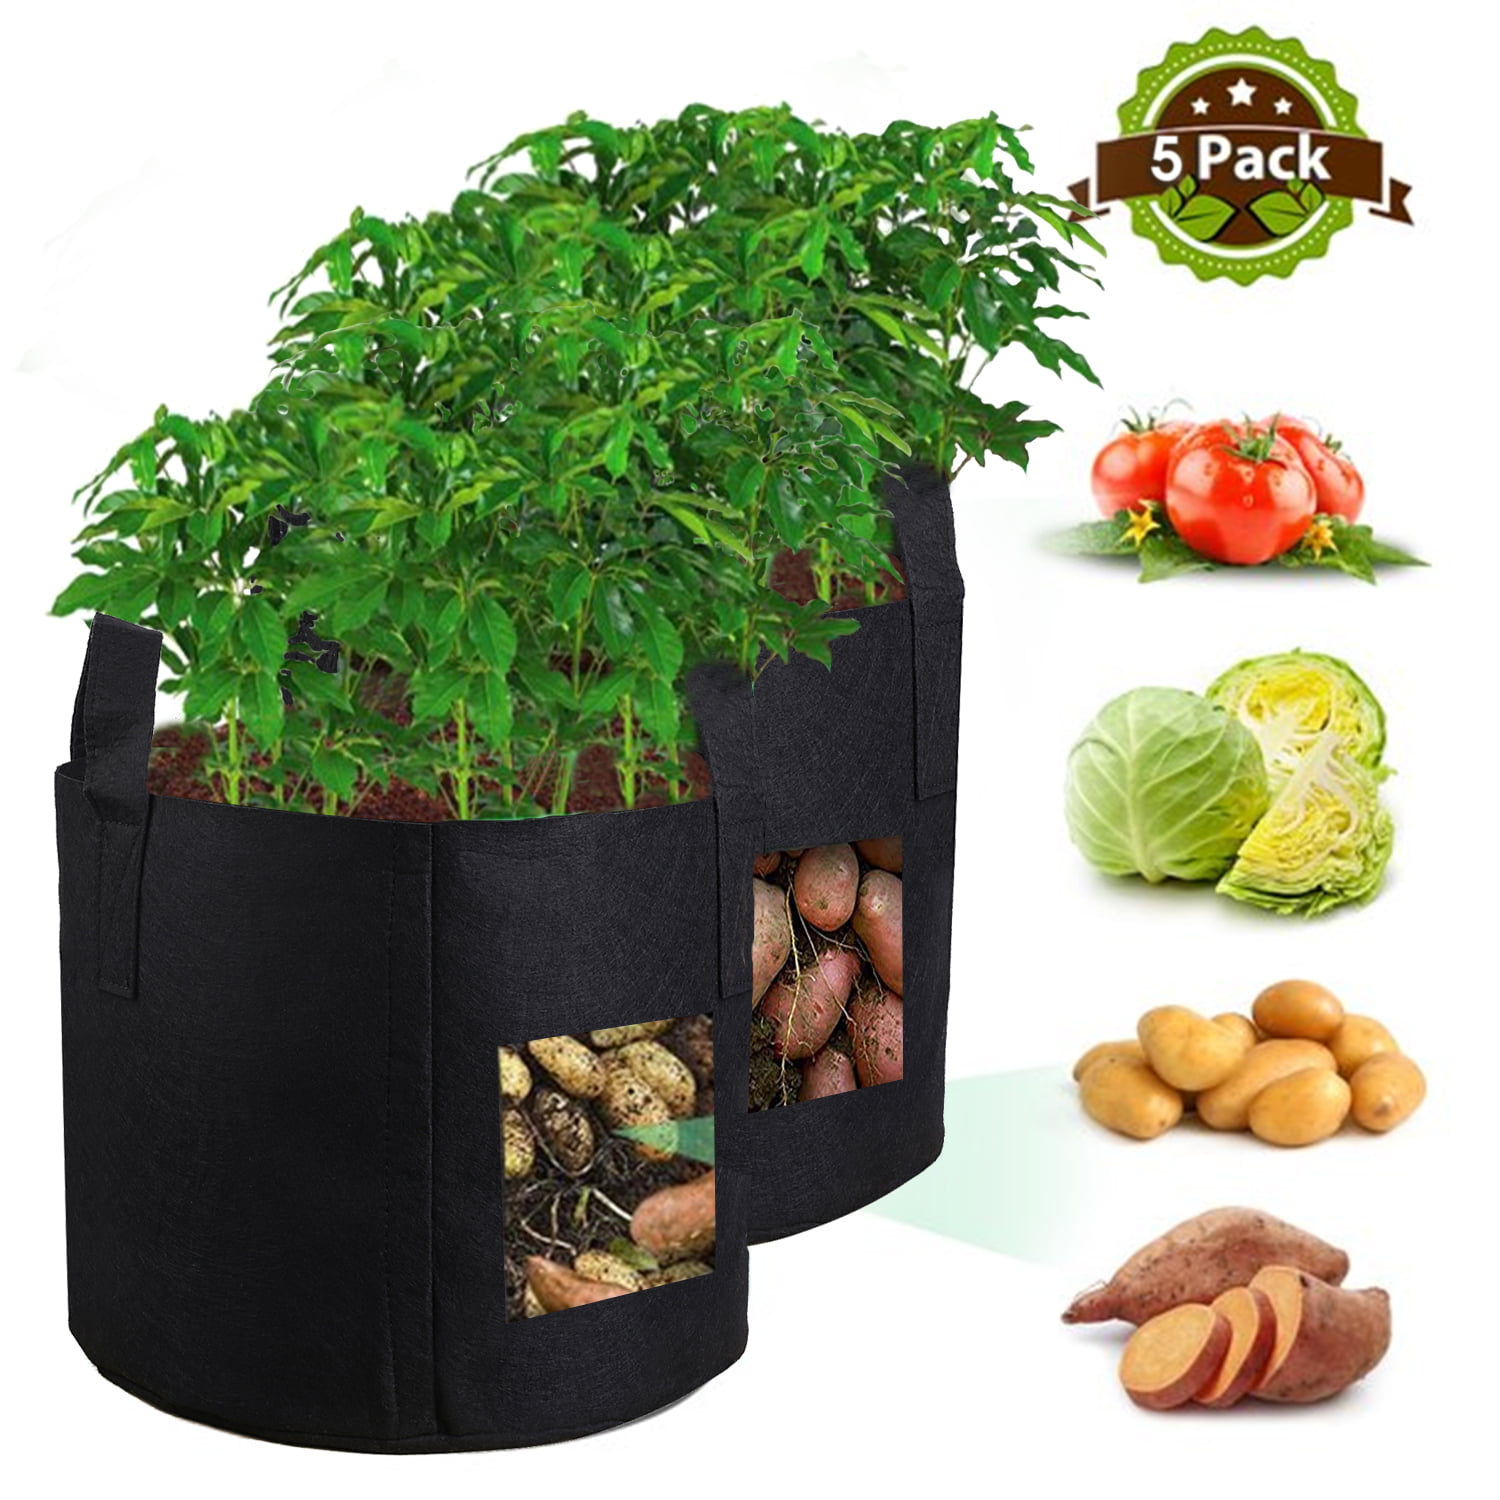 Details about   5 Gallon Durable Fabric Grow Bag Garden Plant Container by Wonder Pot USA! 